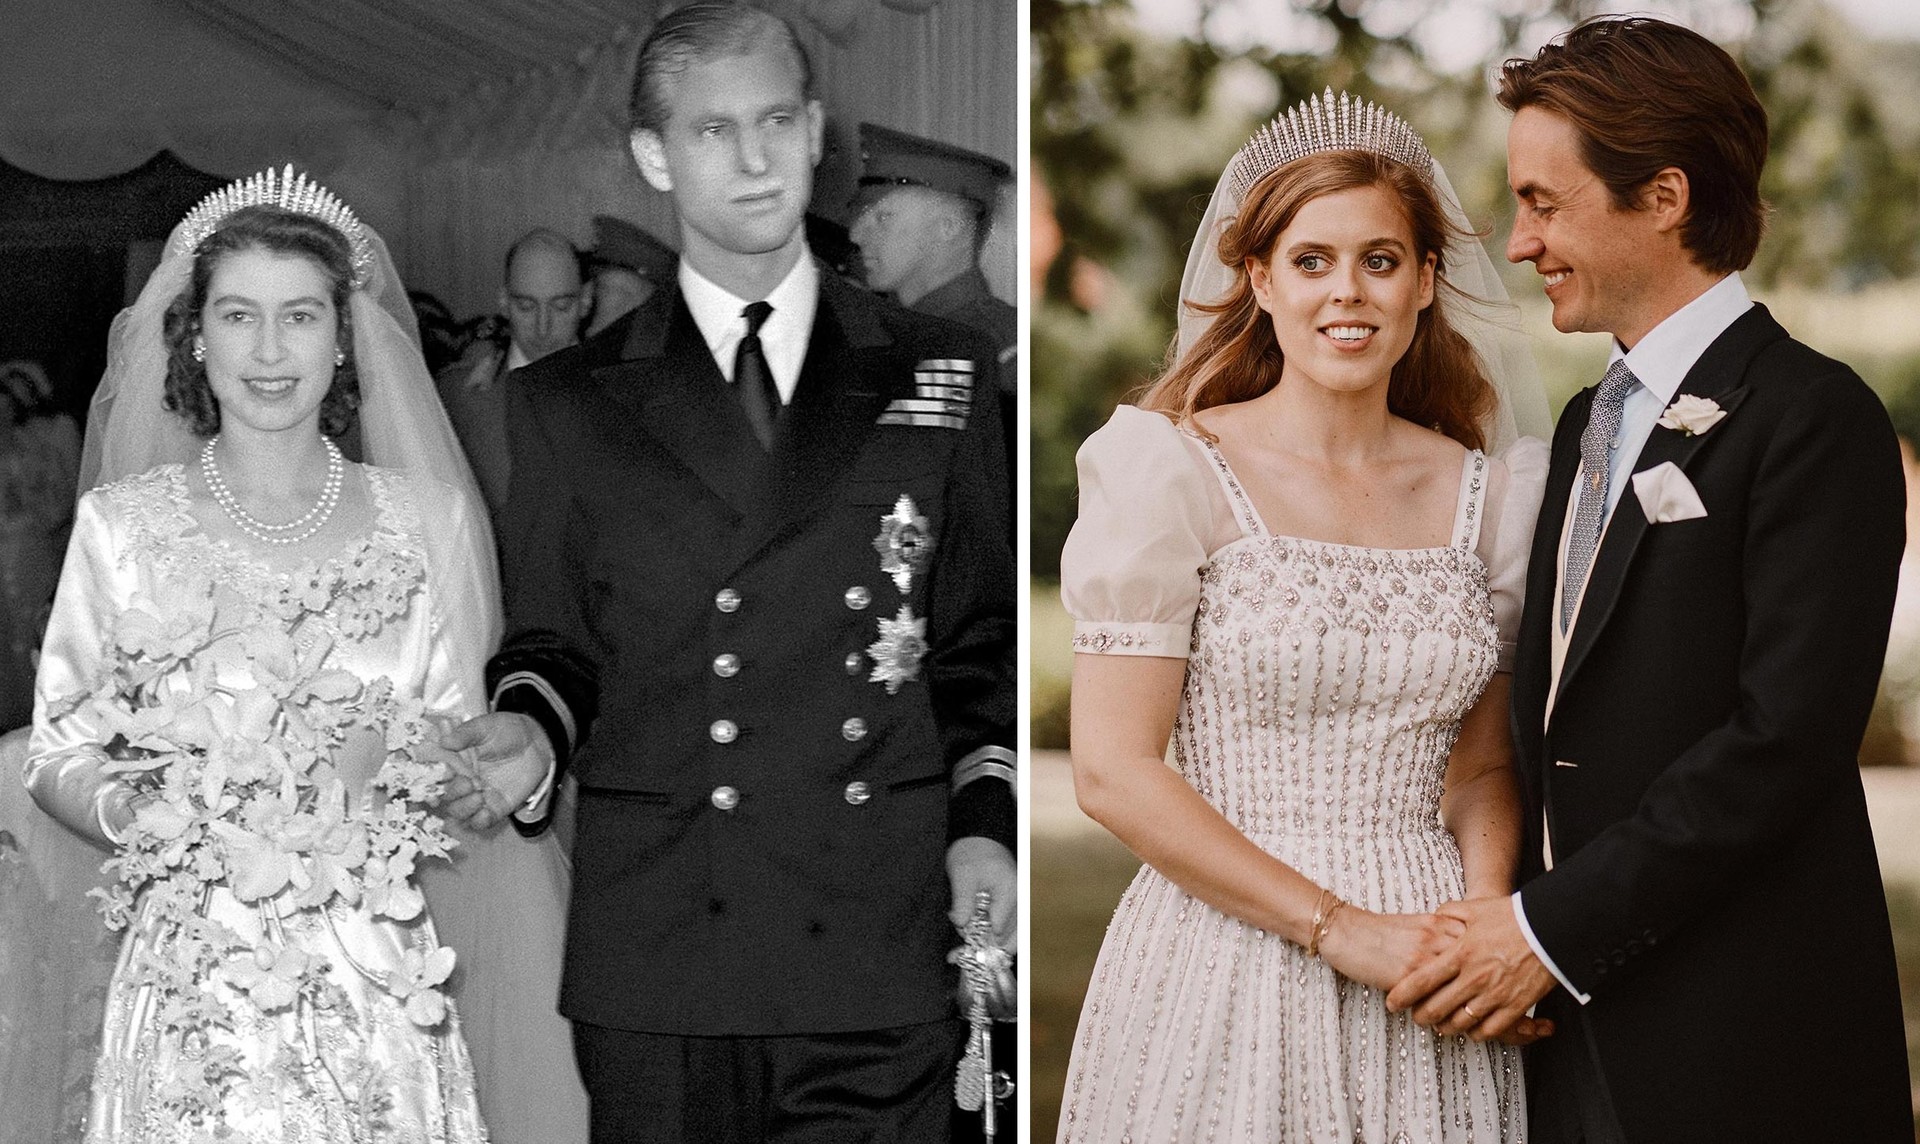 The wedding of Elizabeth II in 1947 and the wedding of Princess Beatrice in 2020. 